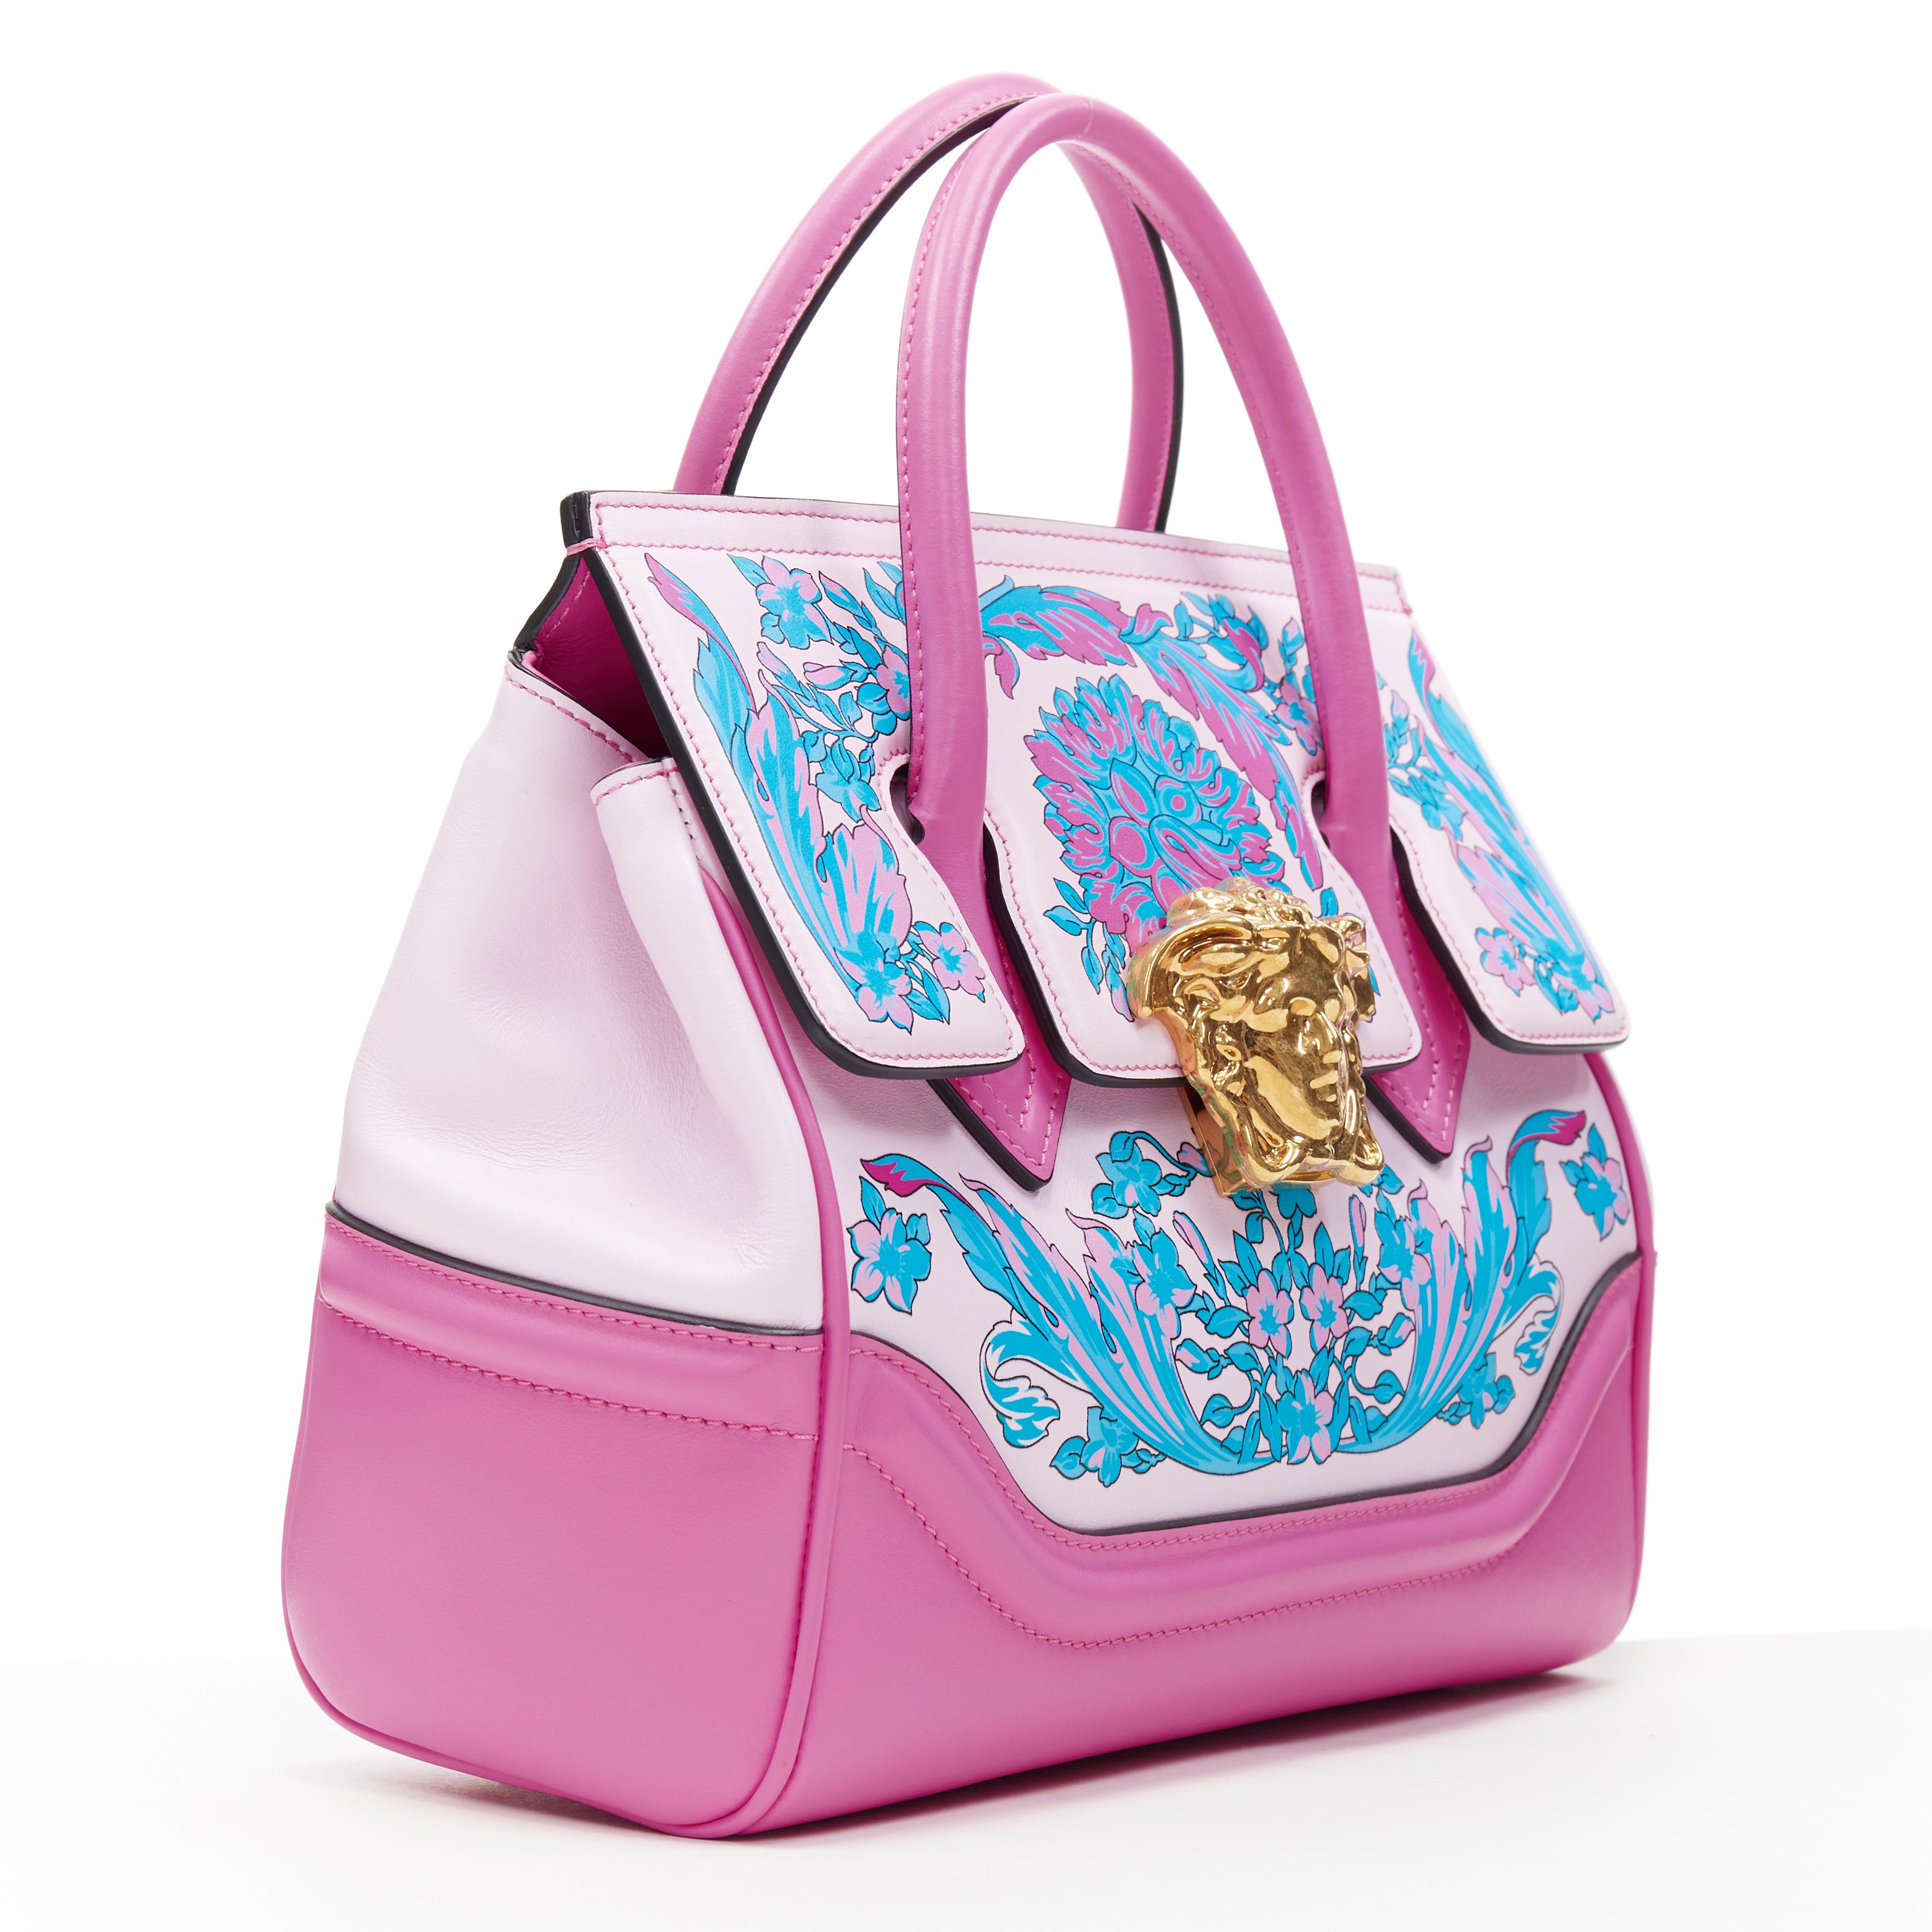 new VERSACE Palazzo Empire Small 2019 Technicolor Baroque pink Medusa tote bag
Brand: Versace
Designer: Donatella Versace
Collection: Spring Summer 2019
Model Name / Style: Versace Empire
Material: Leather
Color: Pink
Pattern: Floral